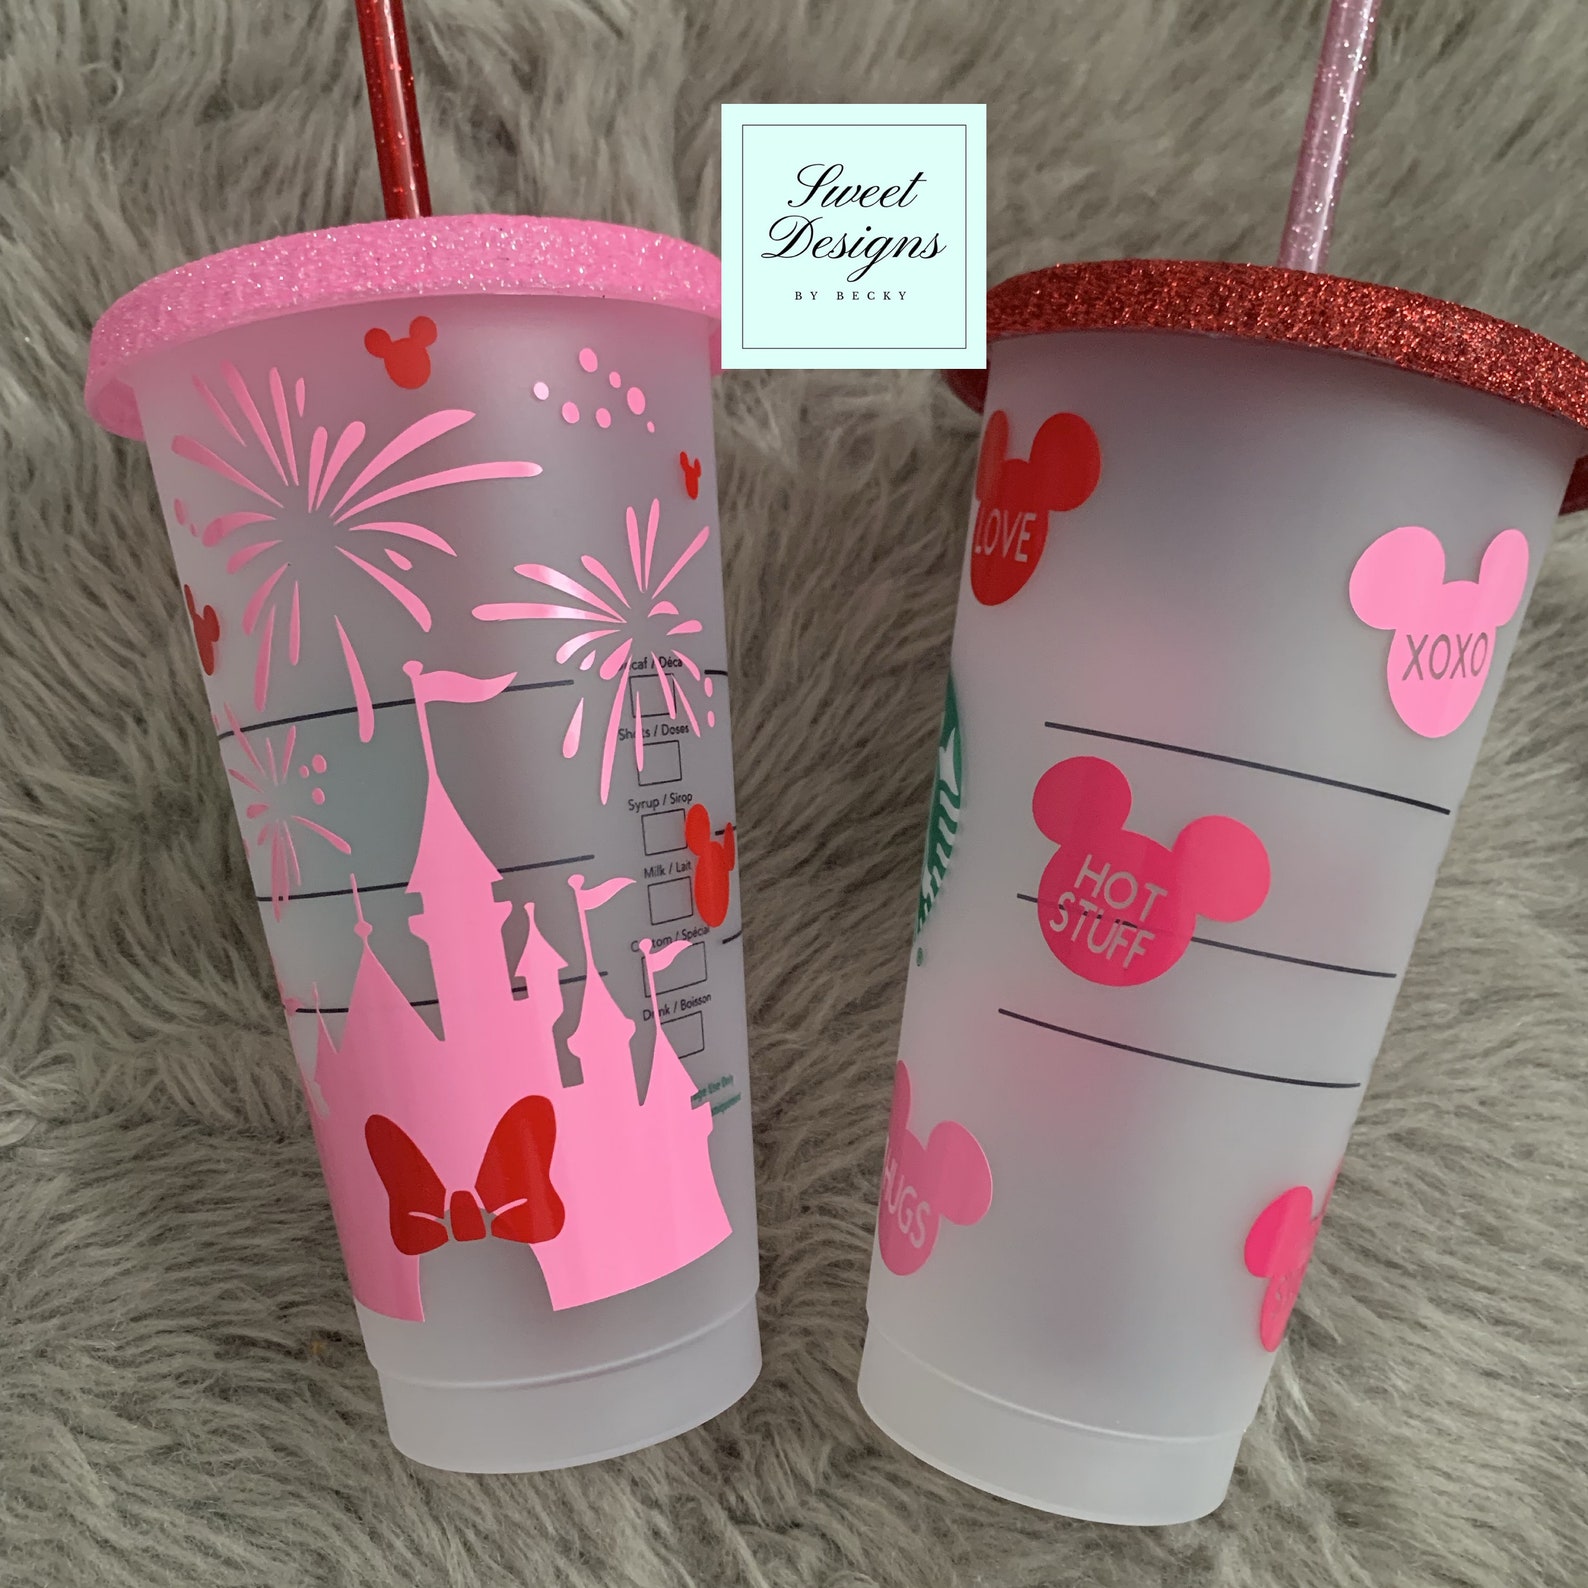 Disney Starbucks Cold Cup With Mickey Ears 